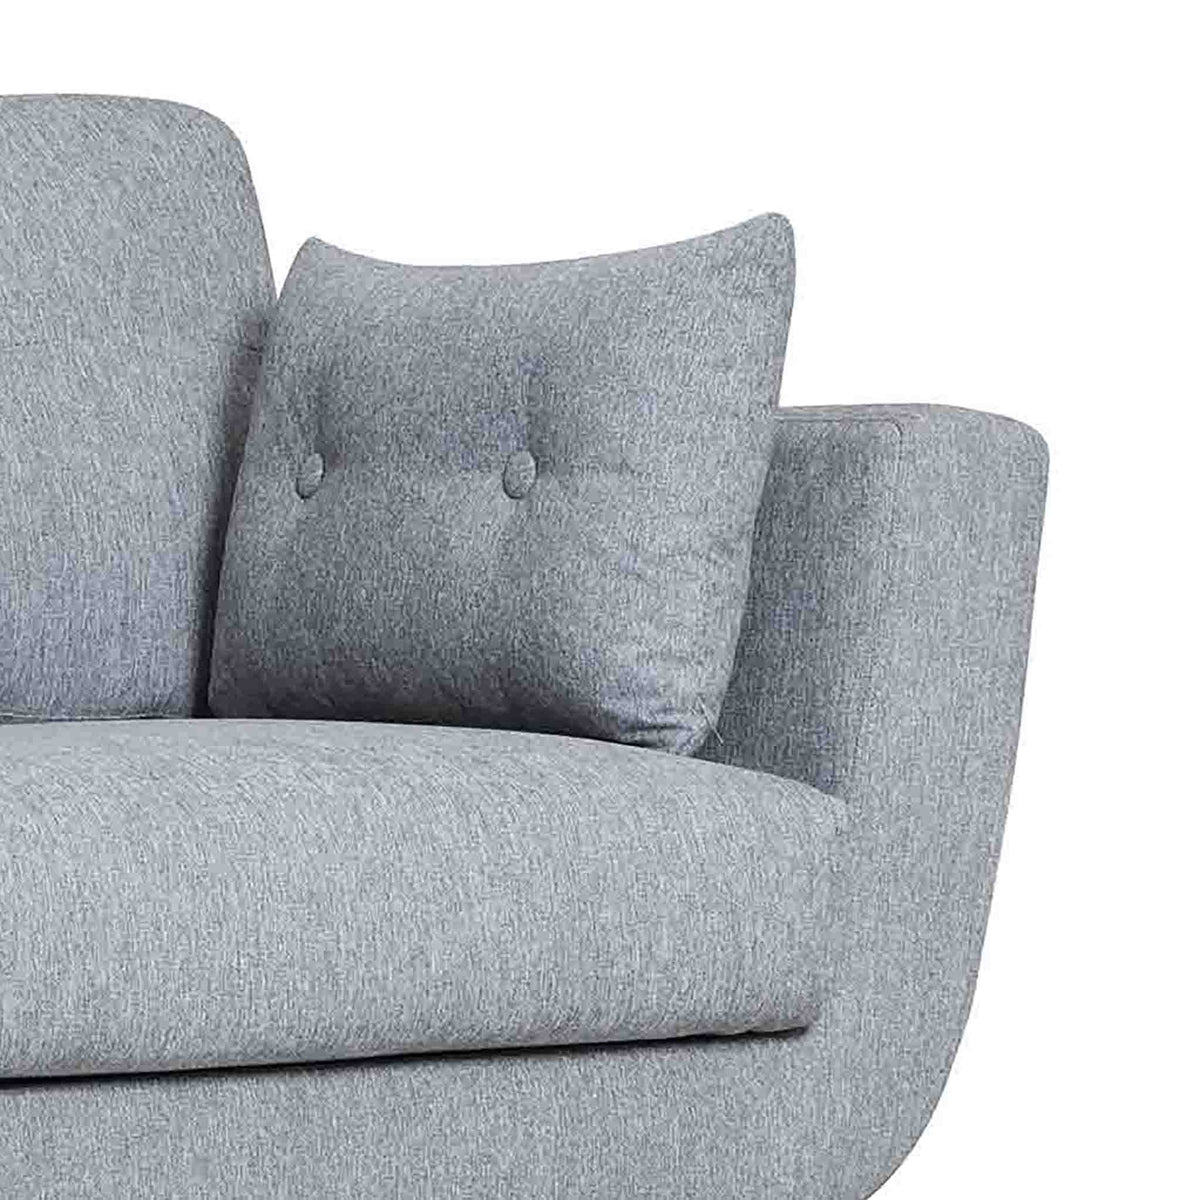 Trom Grey Scandinavian style fabric armchair - Close up of arm rest and scatter cushion